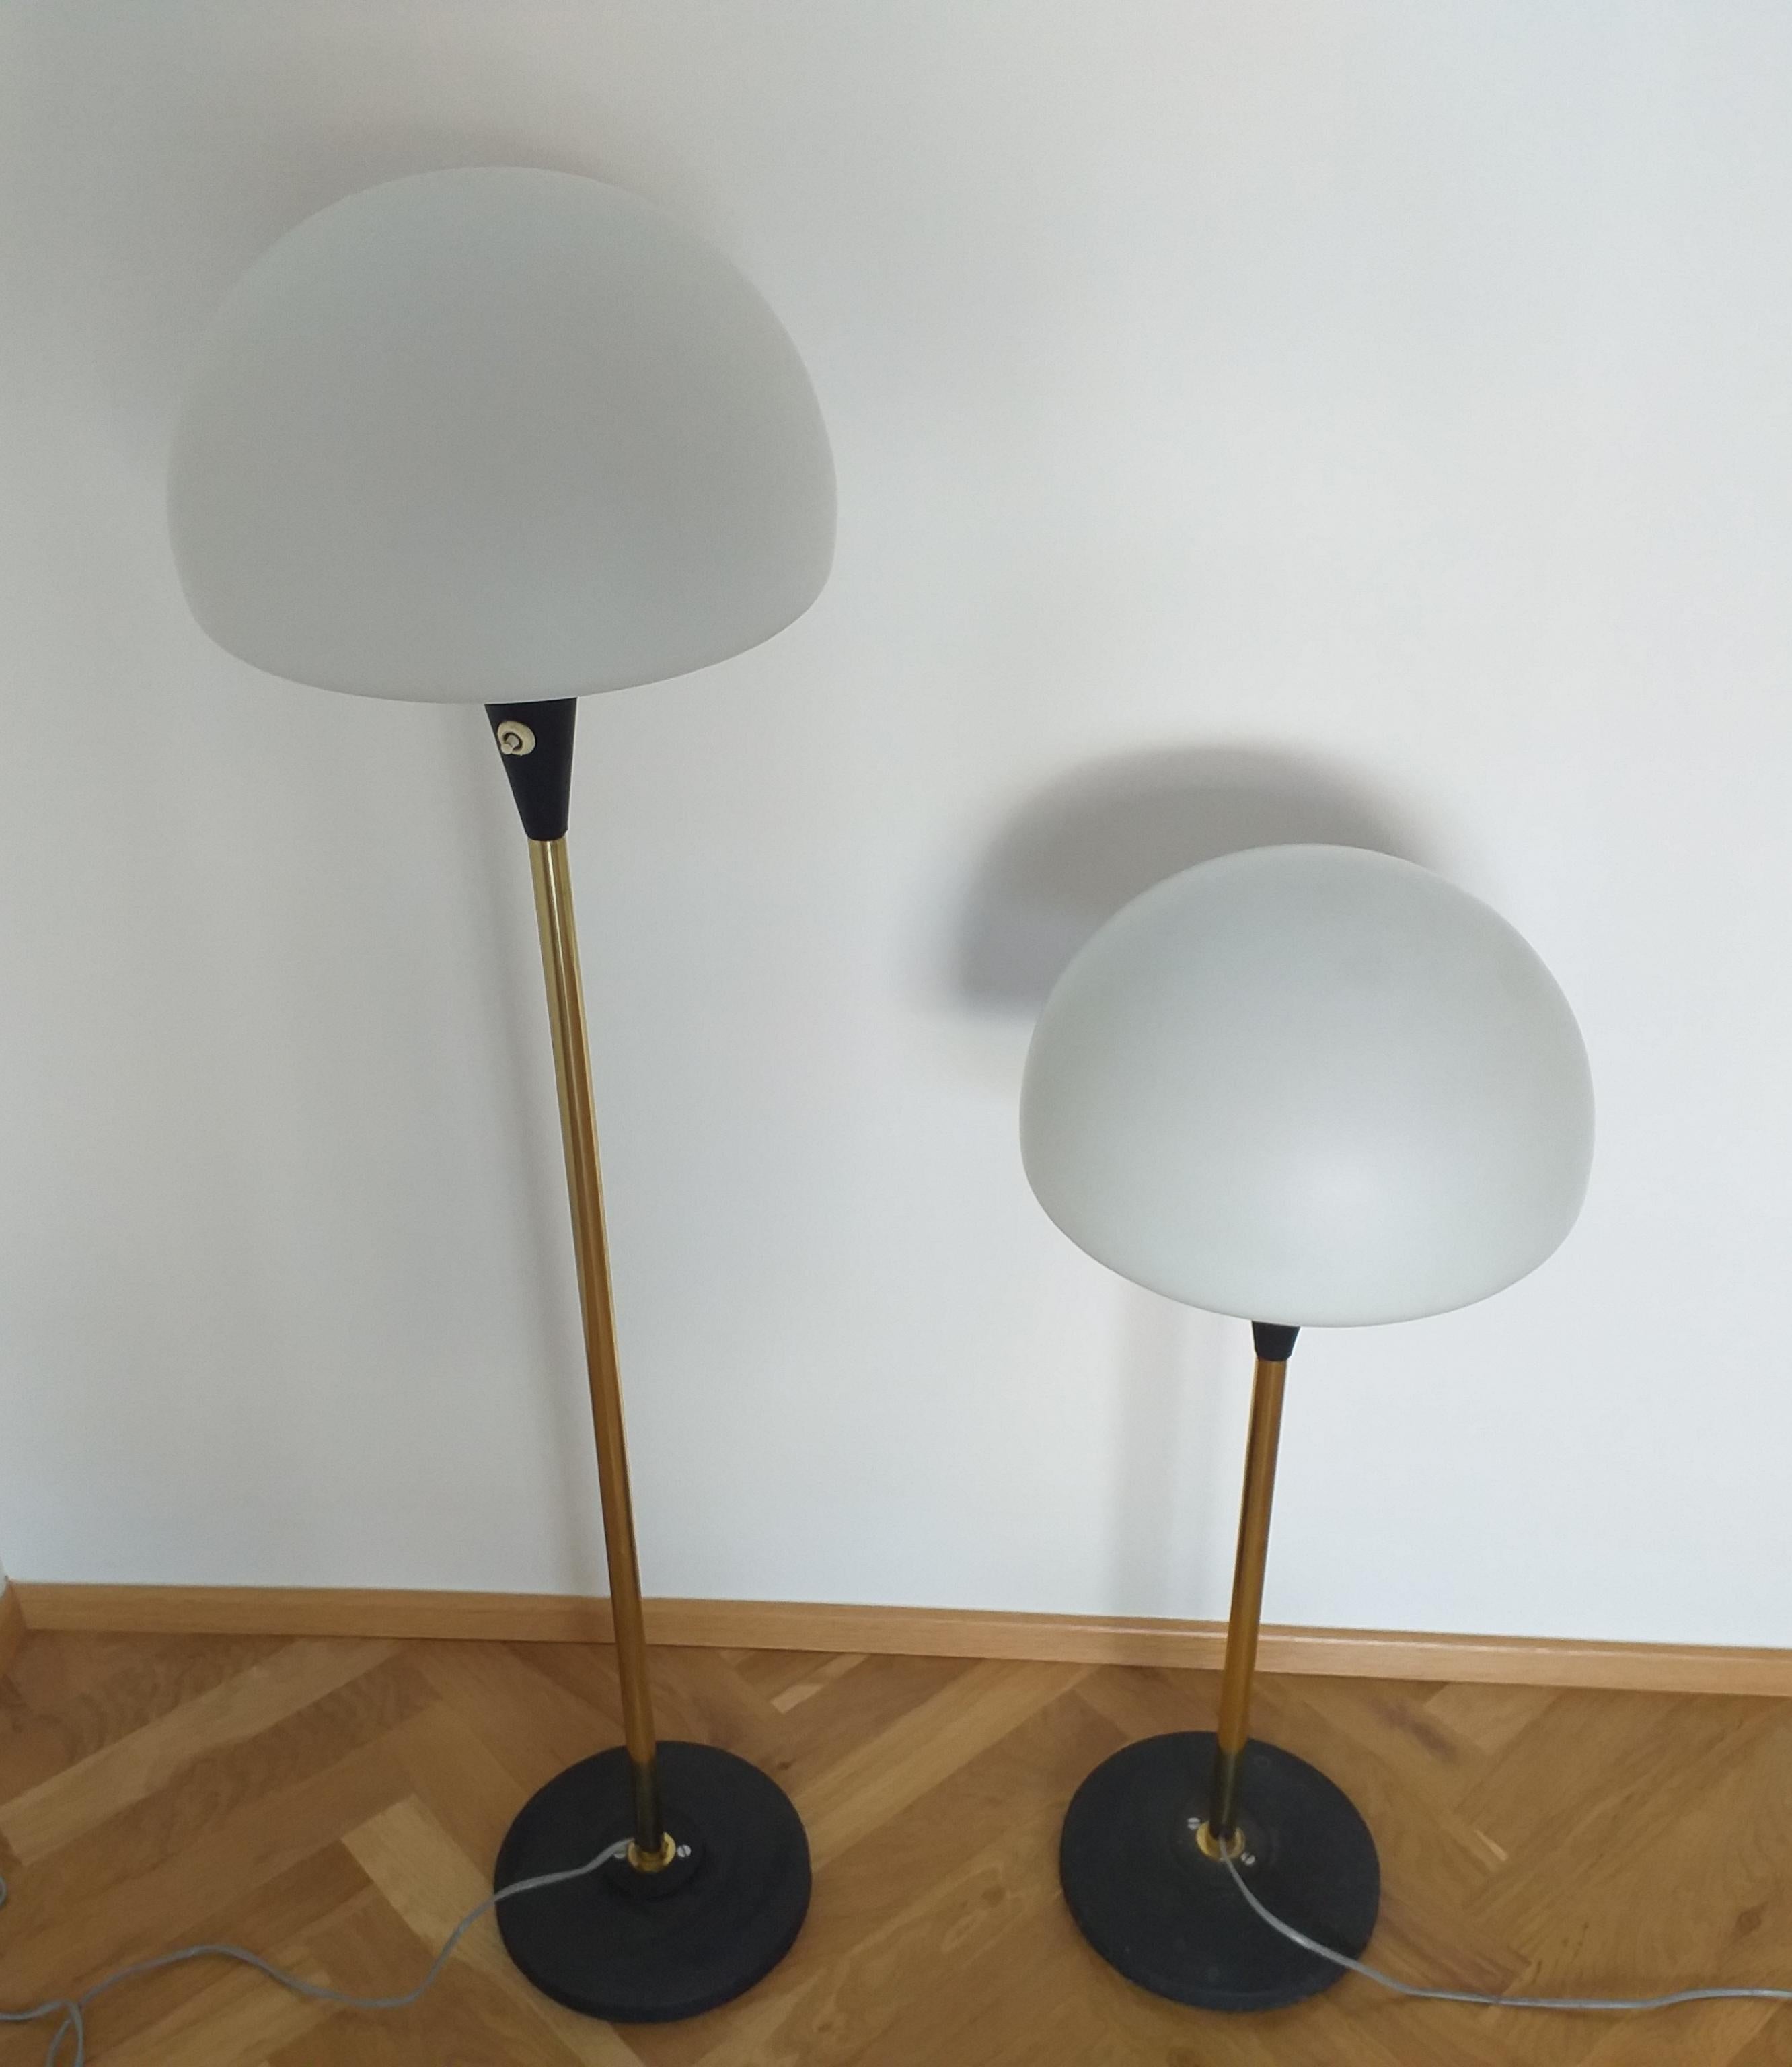 Set of Two Floor Lamps Lidokov Designed by Josef Hurka, 1970s For Sale 5